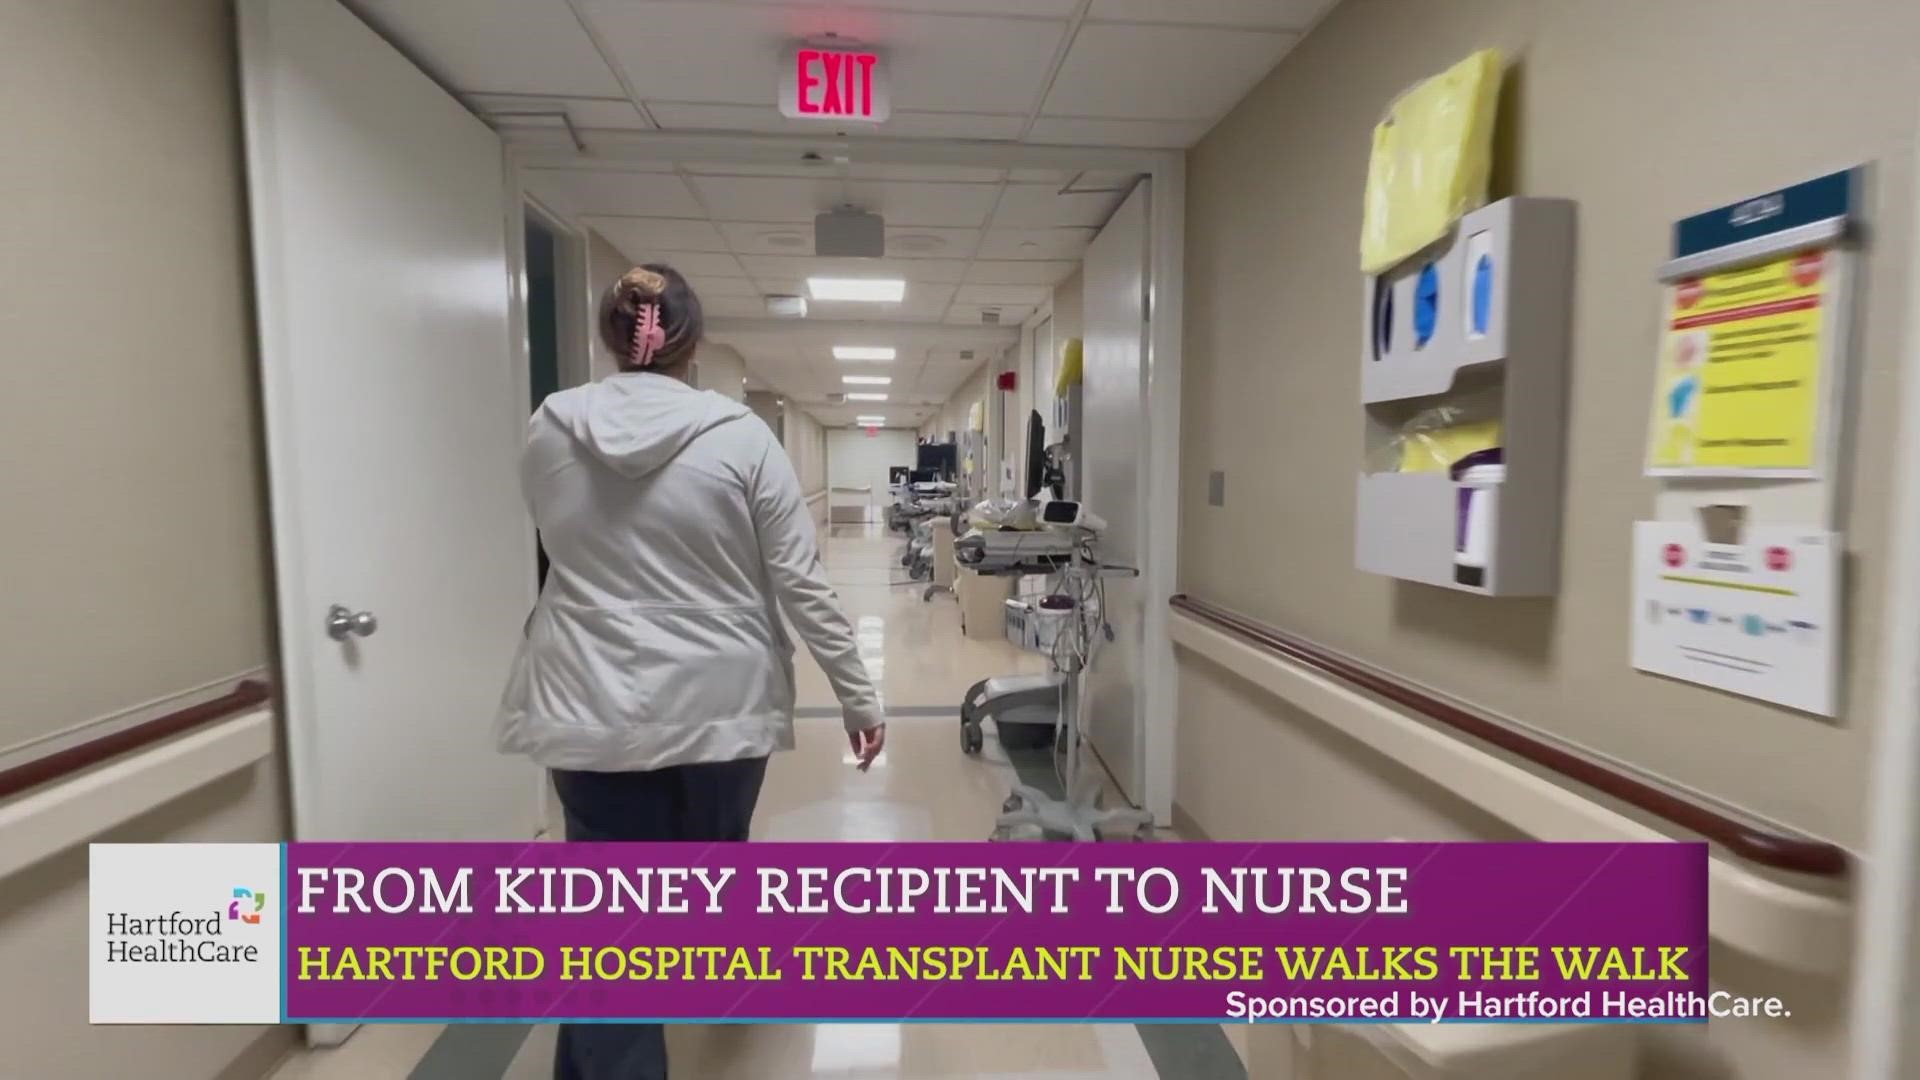 Maddie Martin was in end stage renal failure by age 20. She underwent a successful kidney transplant at Hartford Hospital. See how her life has come full circle.